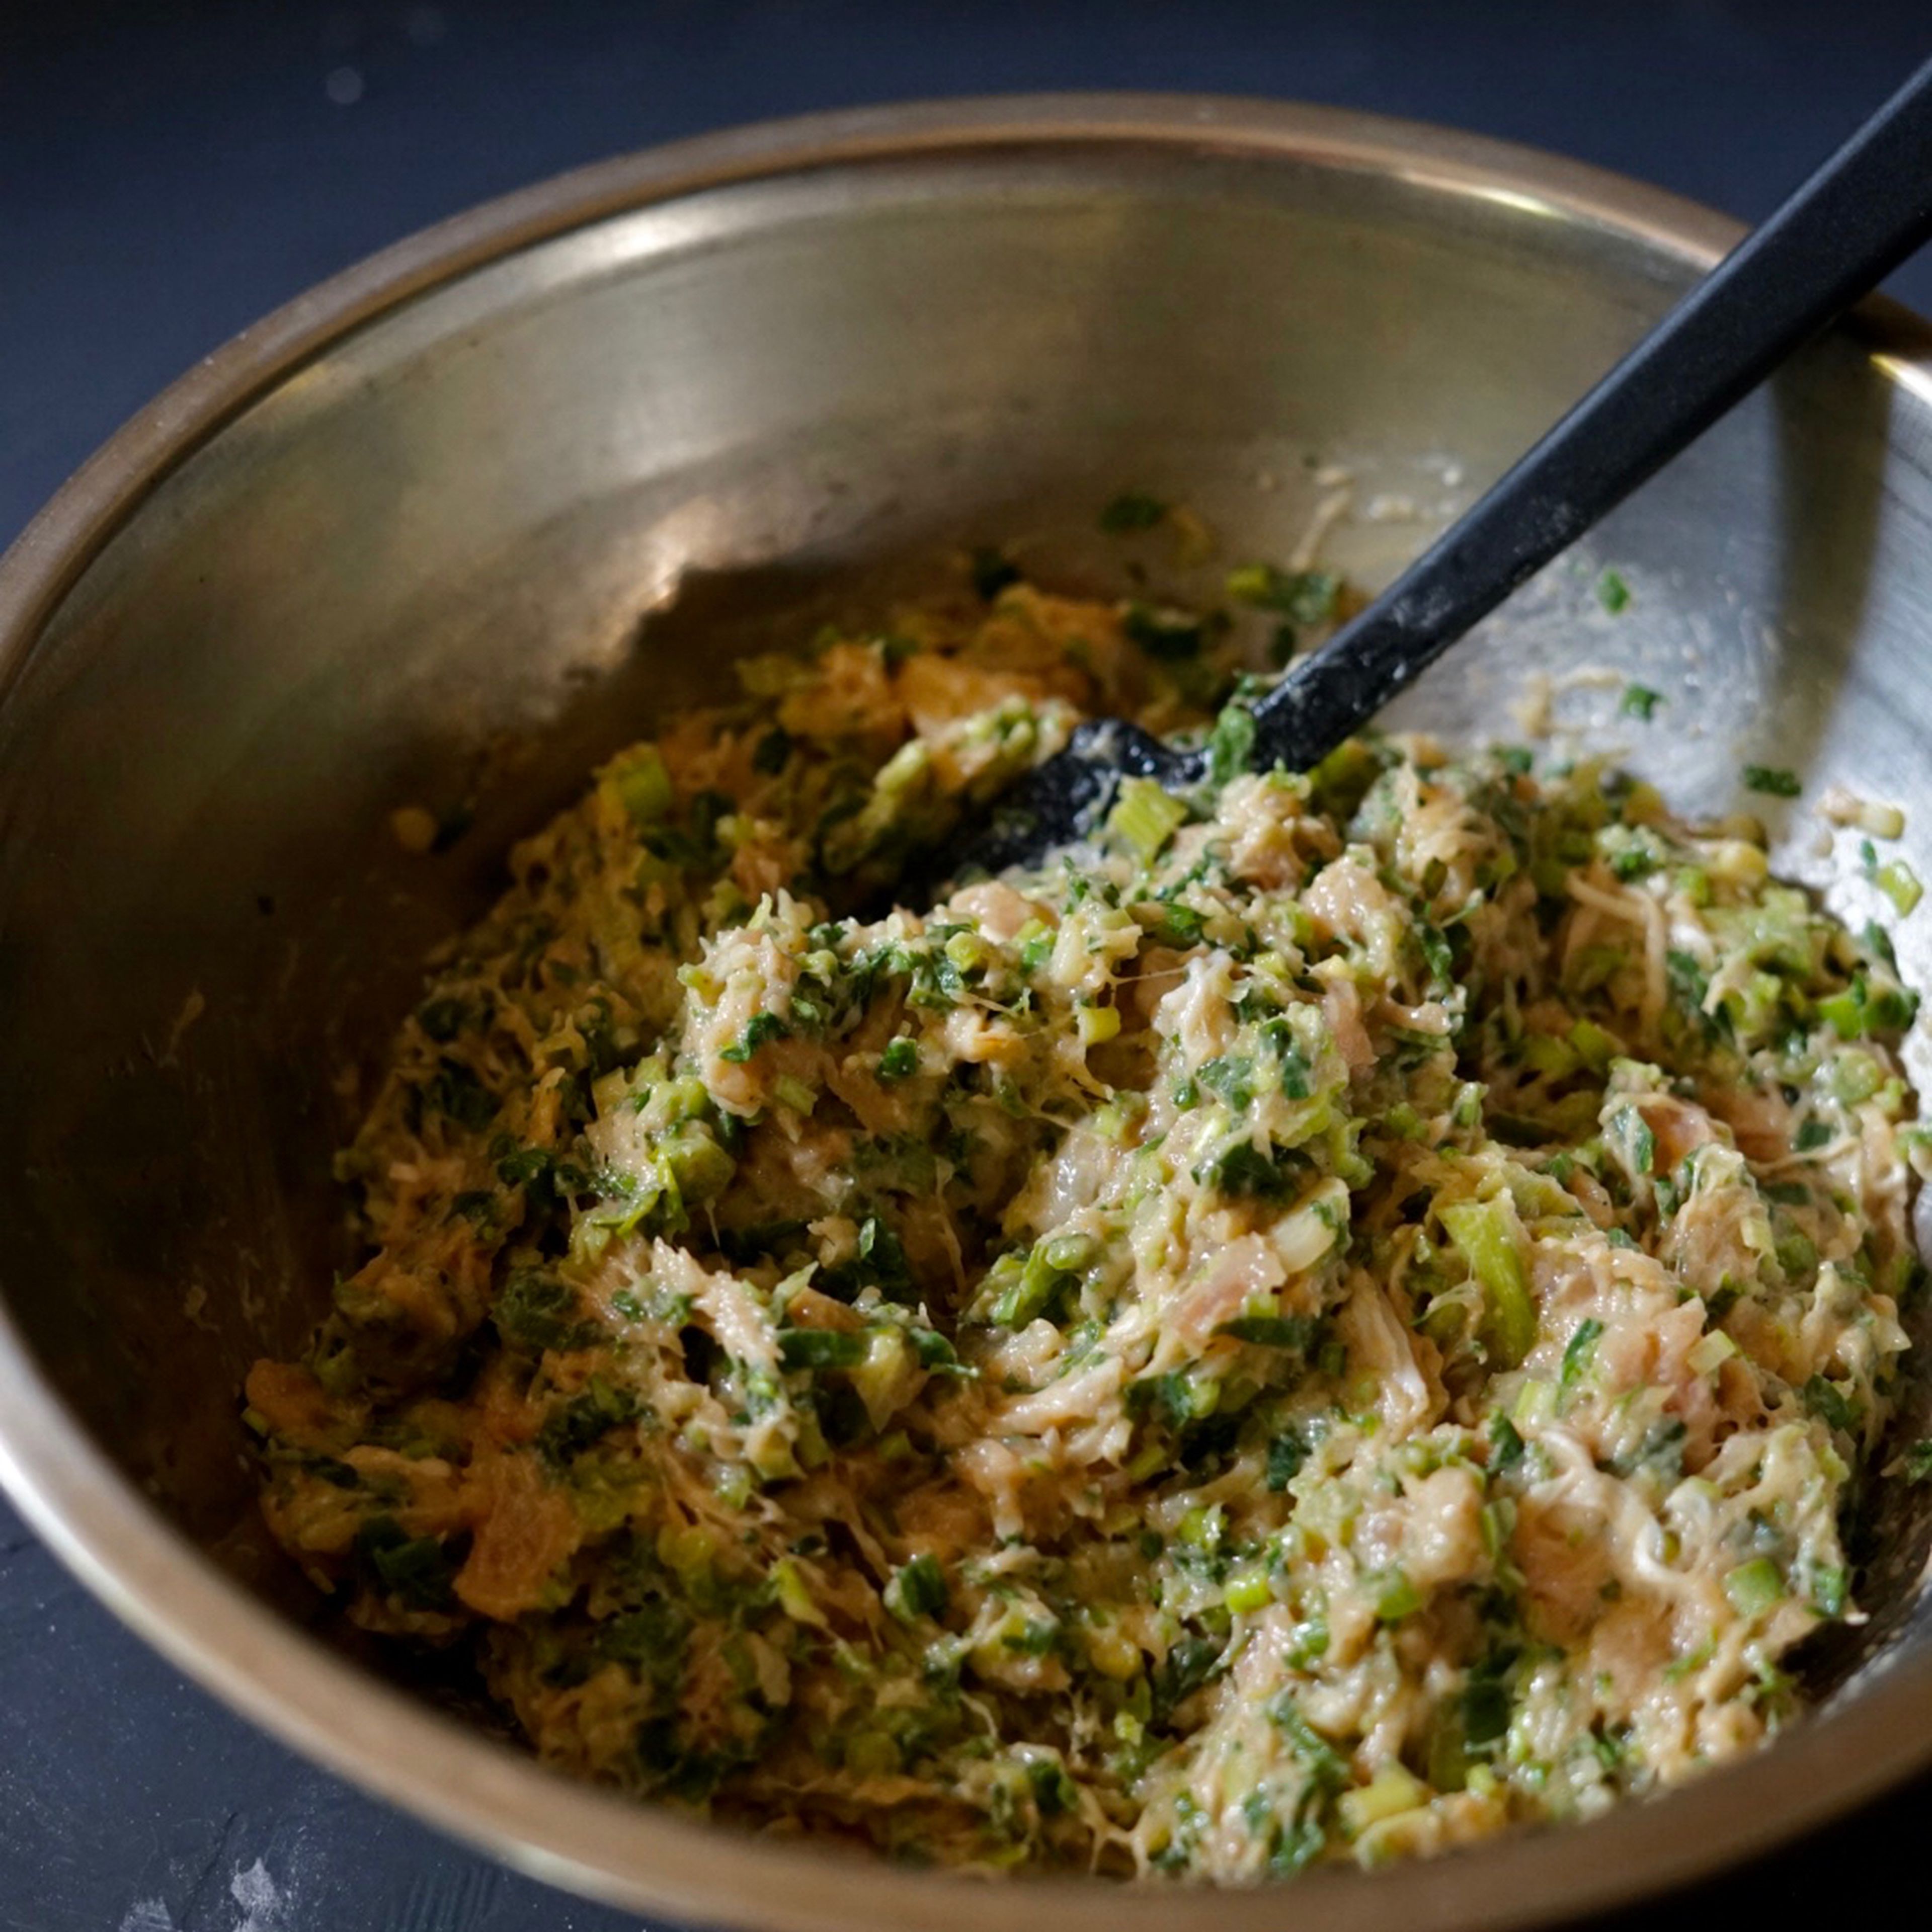 Add the chopped cilantro into the mixture, blend until it is well combined.